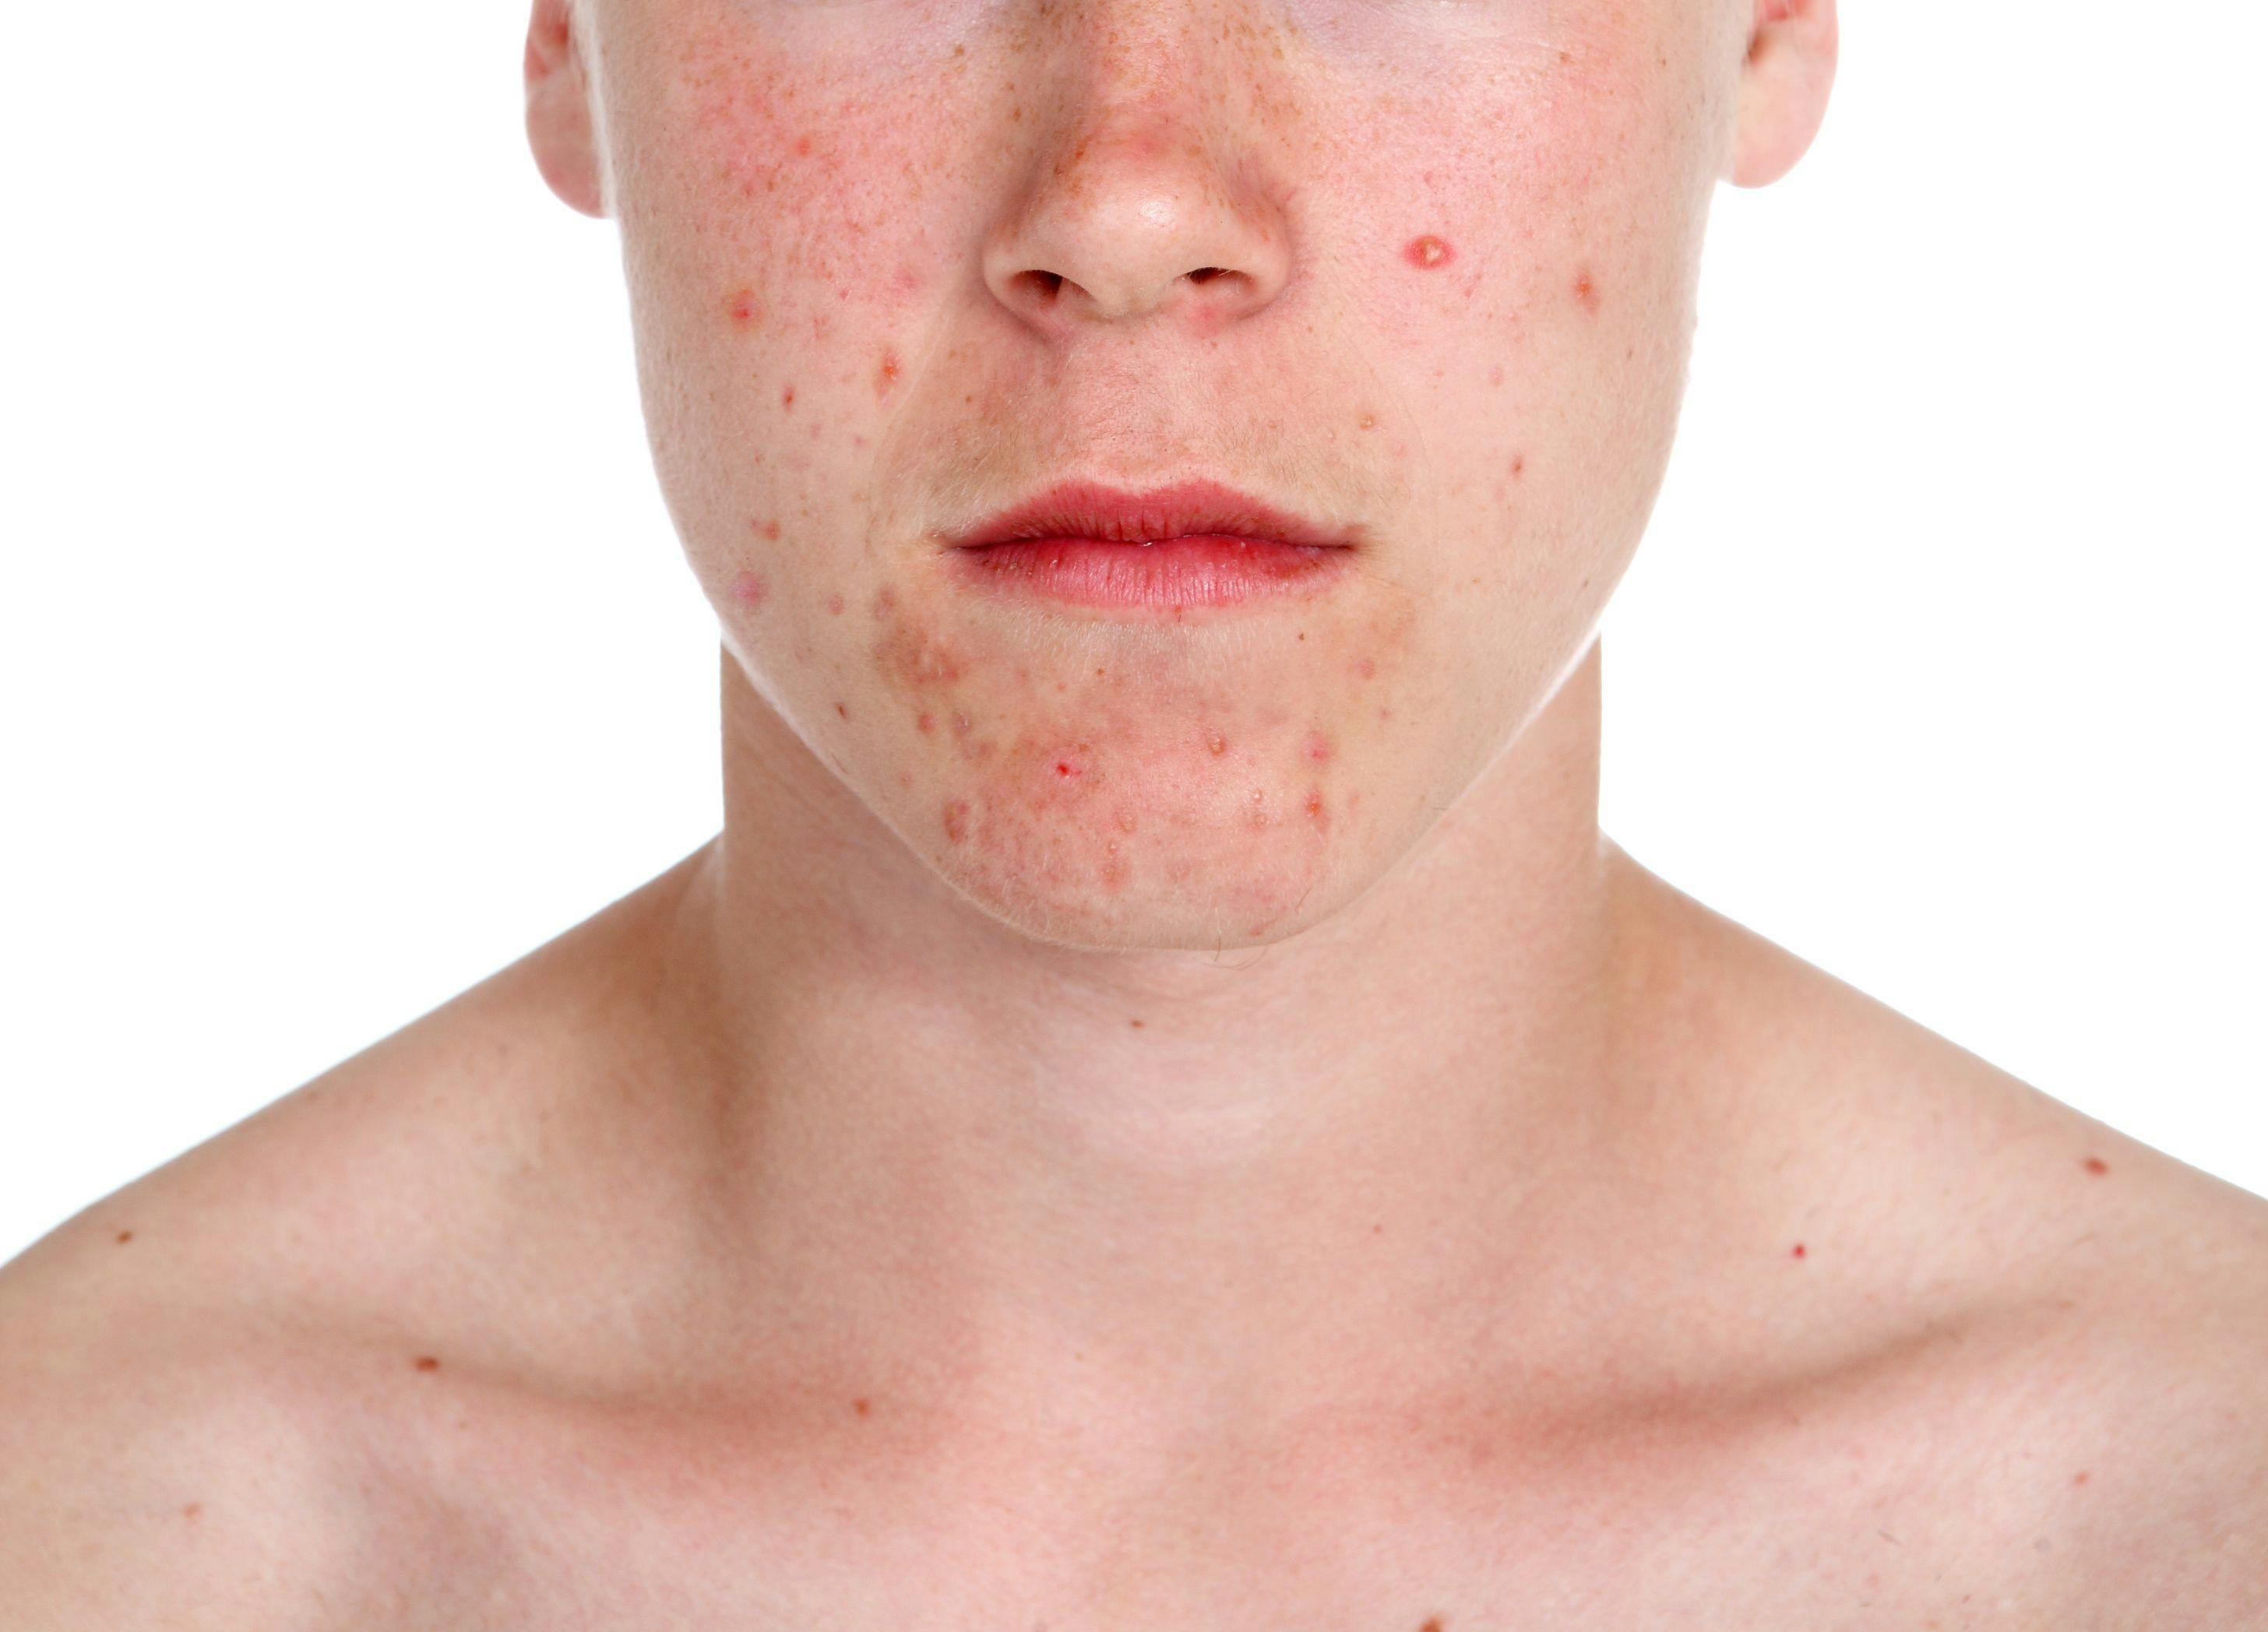 The Role of Nonprescription Products in the Management of Acne